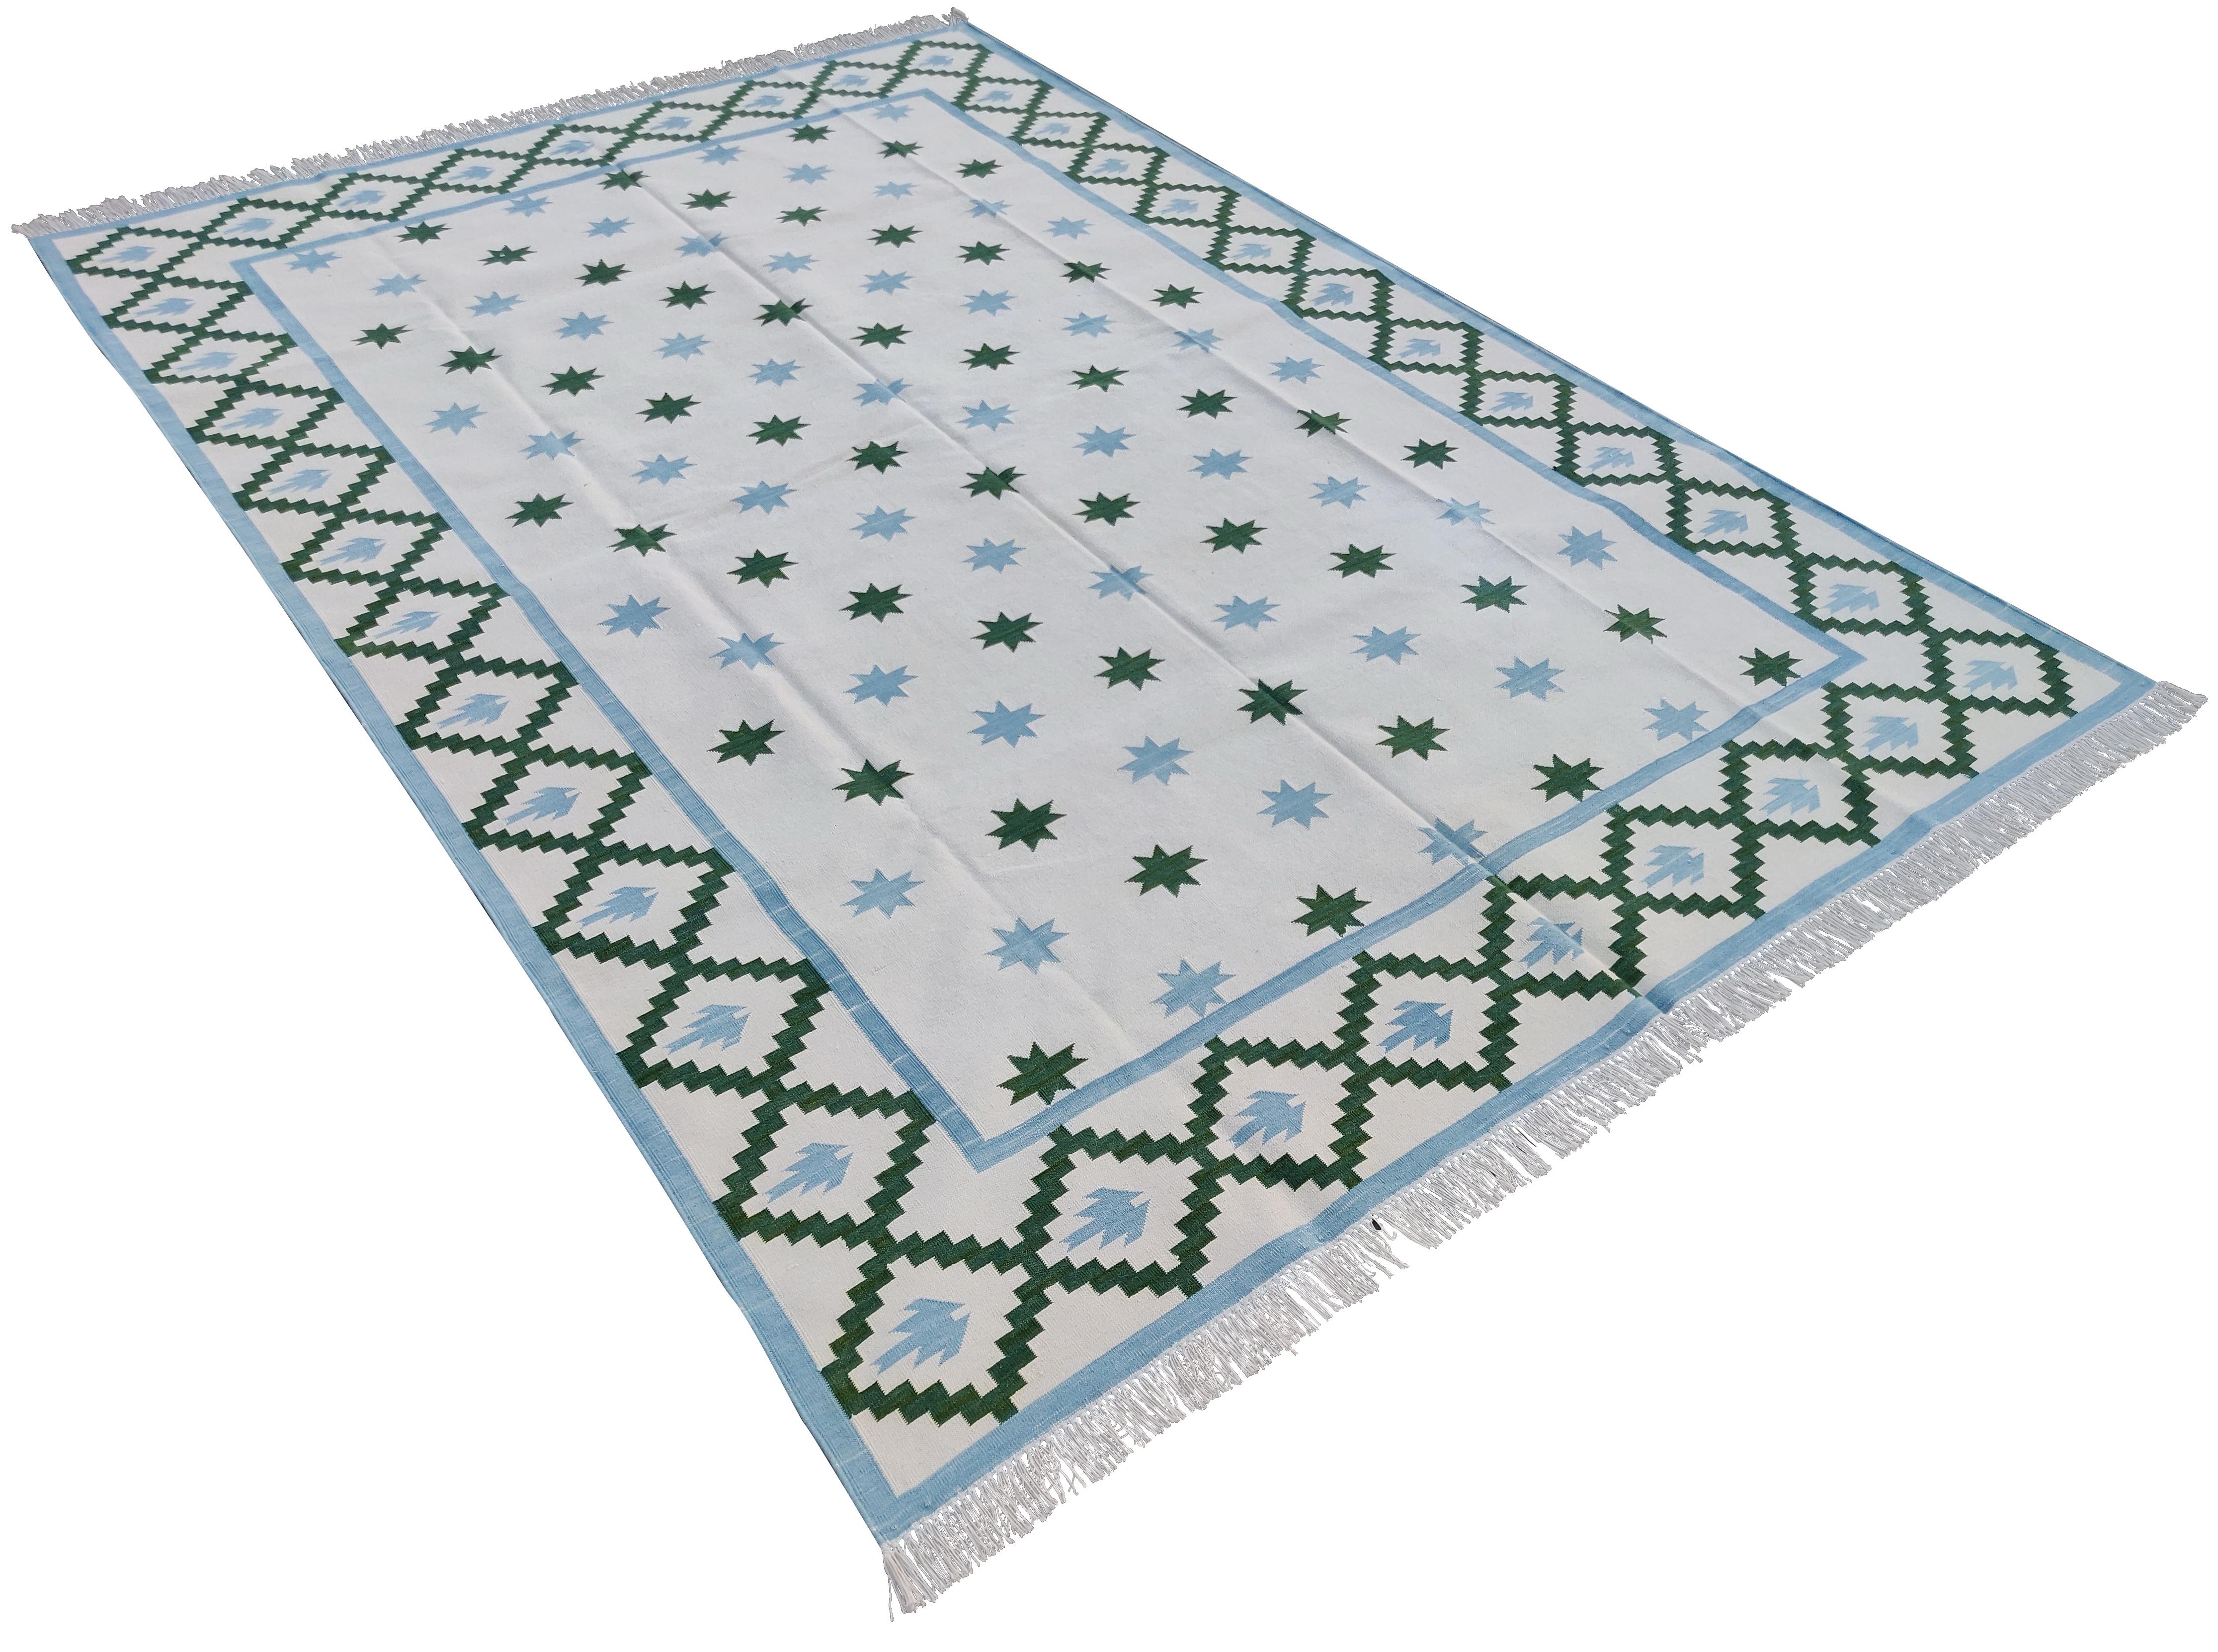 Cotton Natural Vegetable Dyed Cream, Sky Blue And Green Geometric Star Indian Rug-6'x9'
These special flat-weave dhurries are hand-woven with 15 ply 100% cotton yarn. Due to the special manufacturing techniques used to create our rugs, the size and